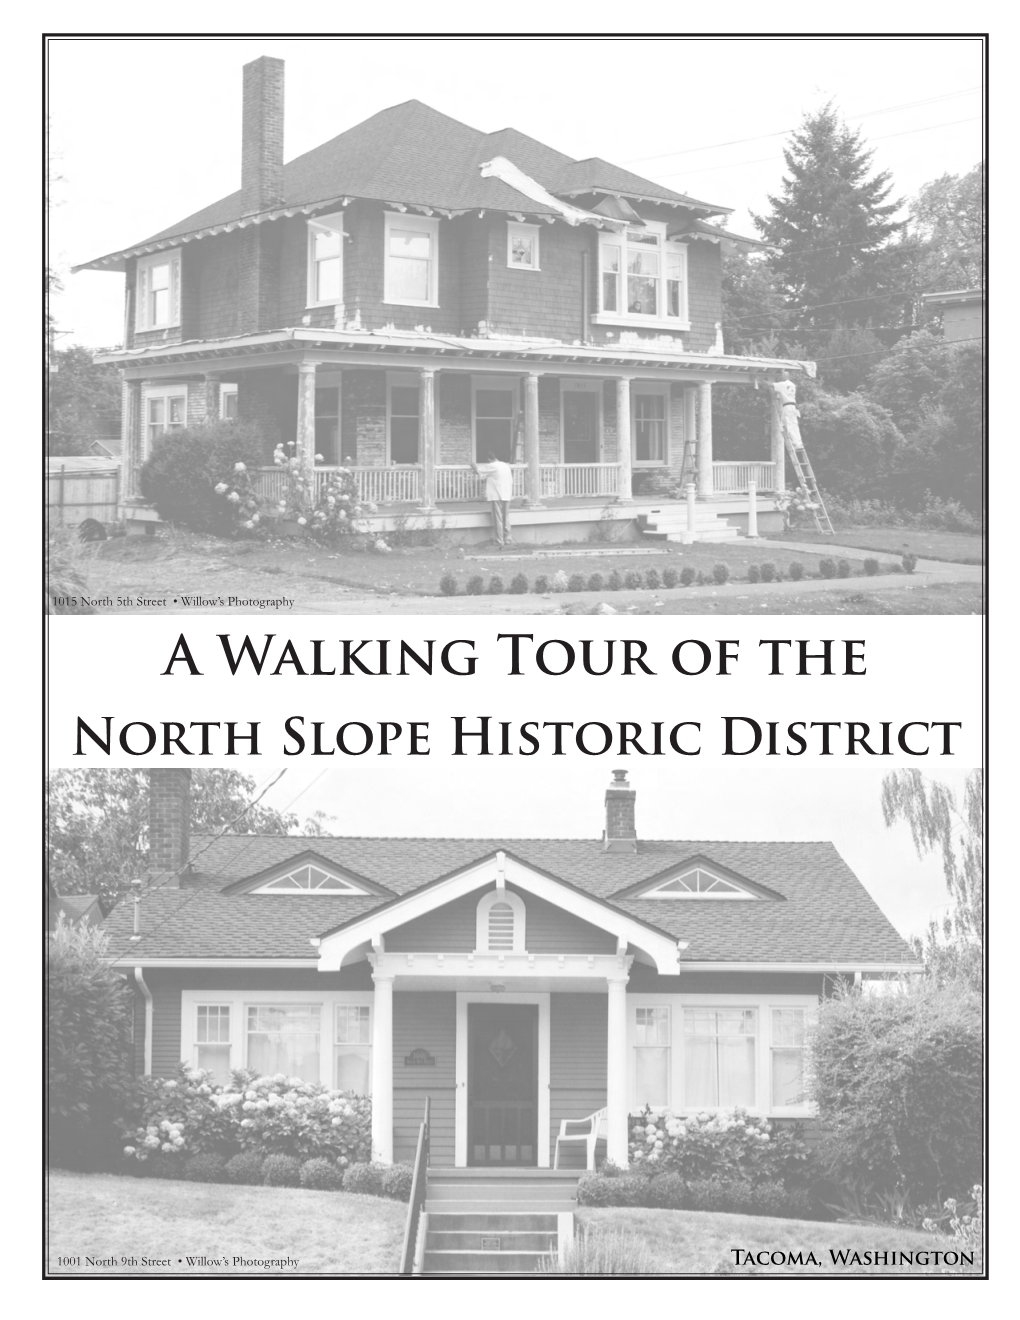 A Walking Tour of the North Slope Historic District